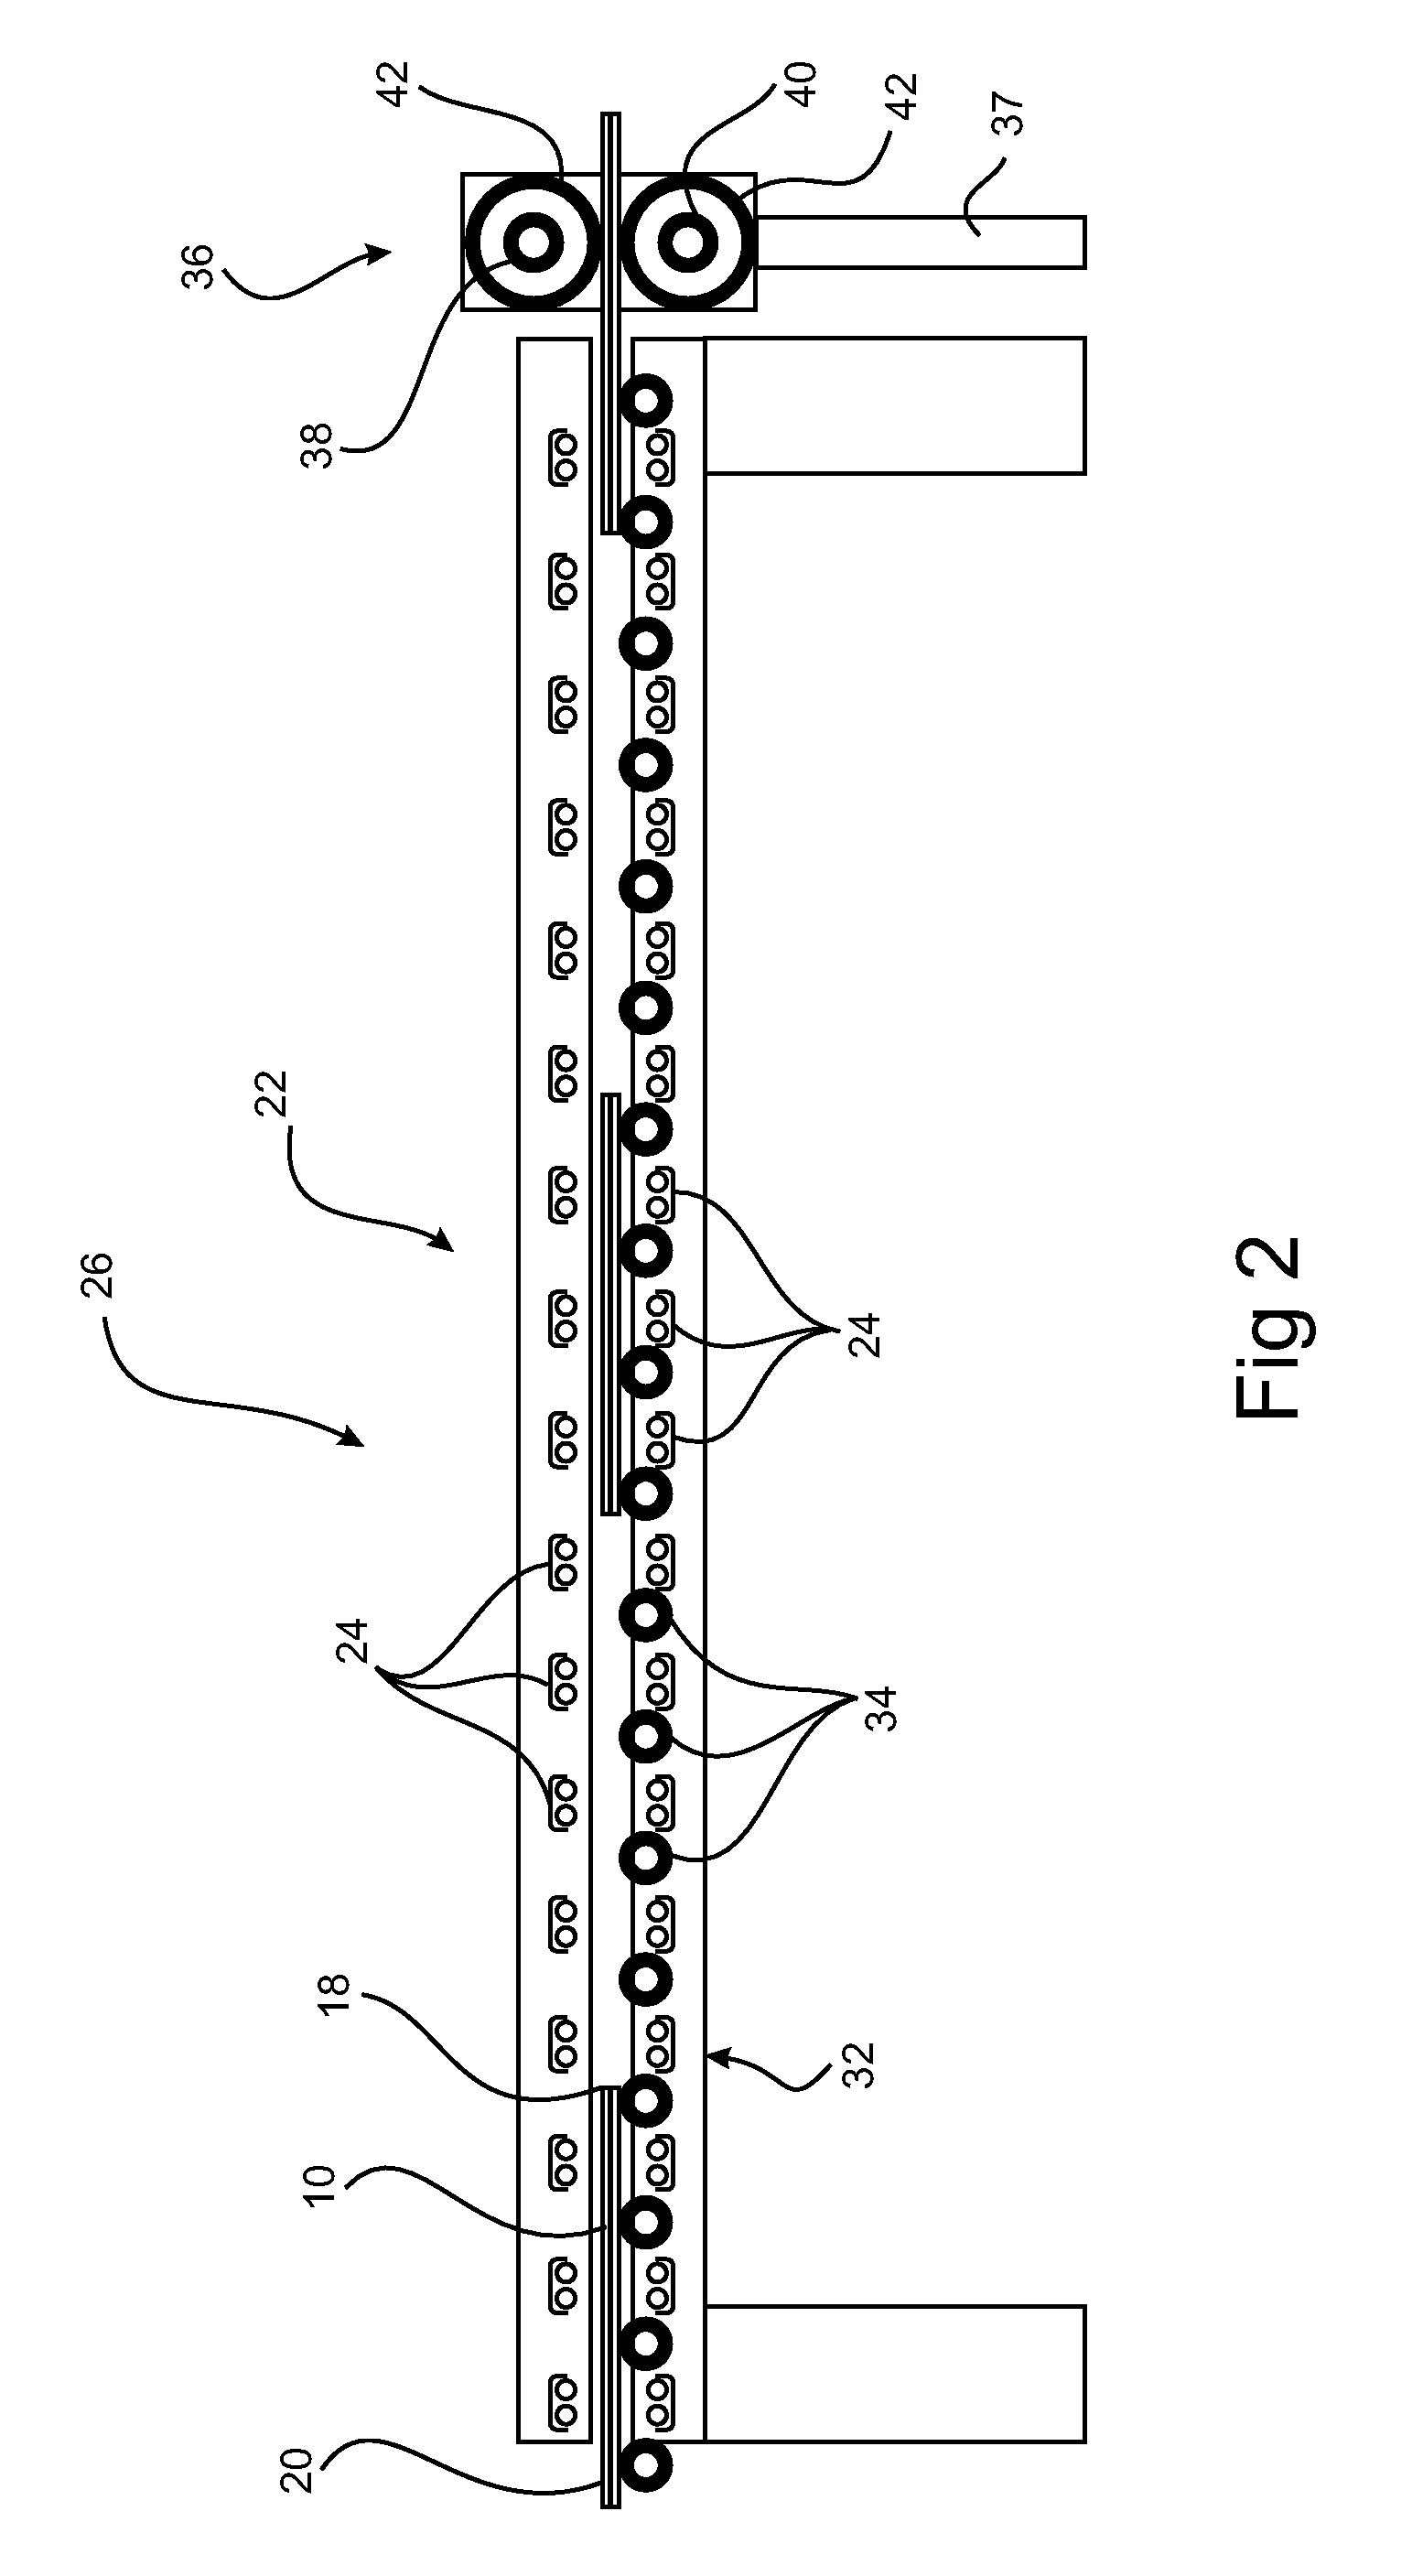 Single Stage Glass Lamination Apparatus and Process